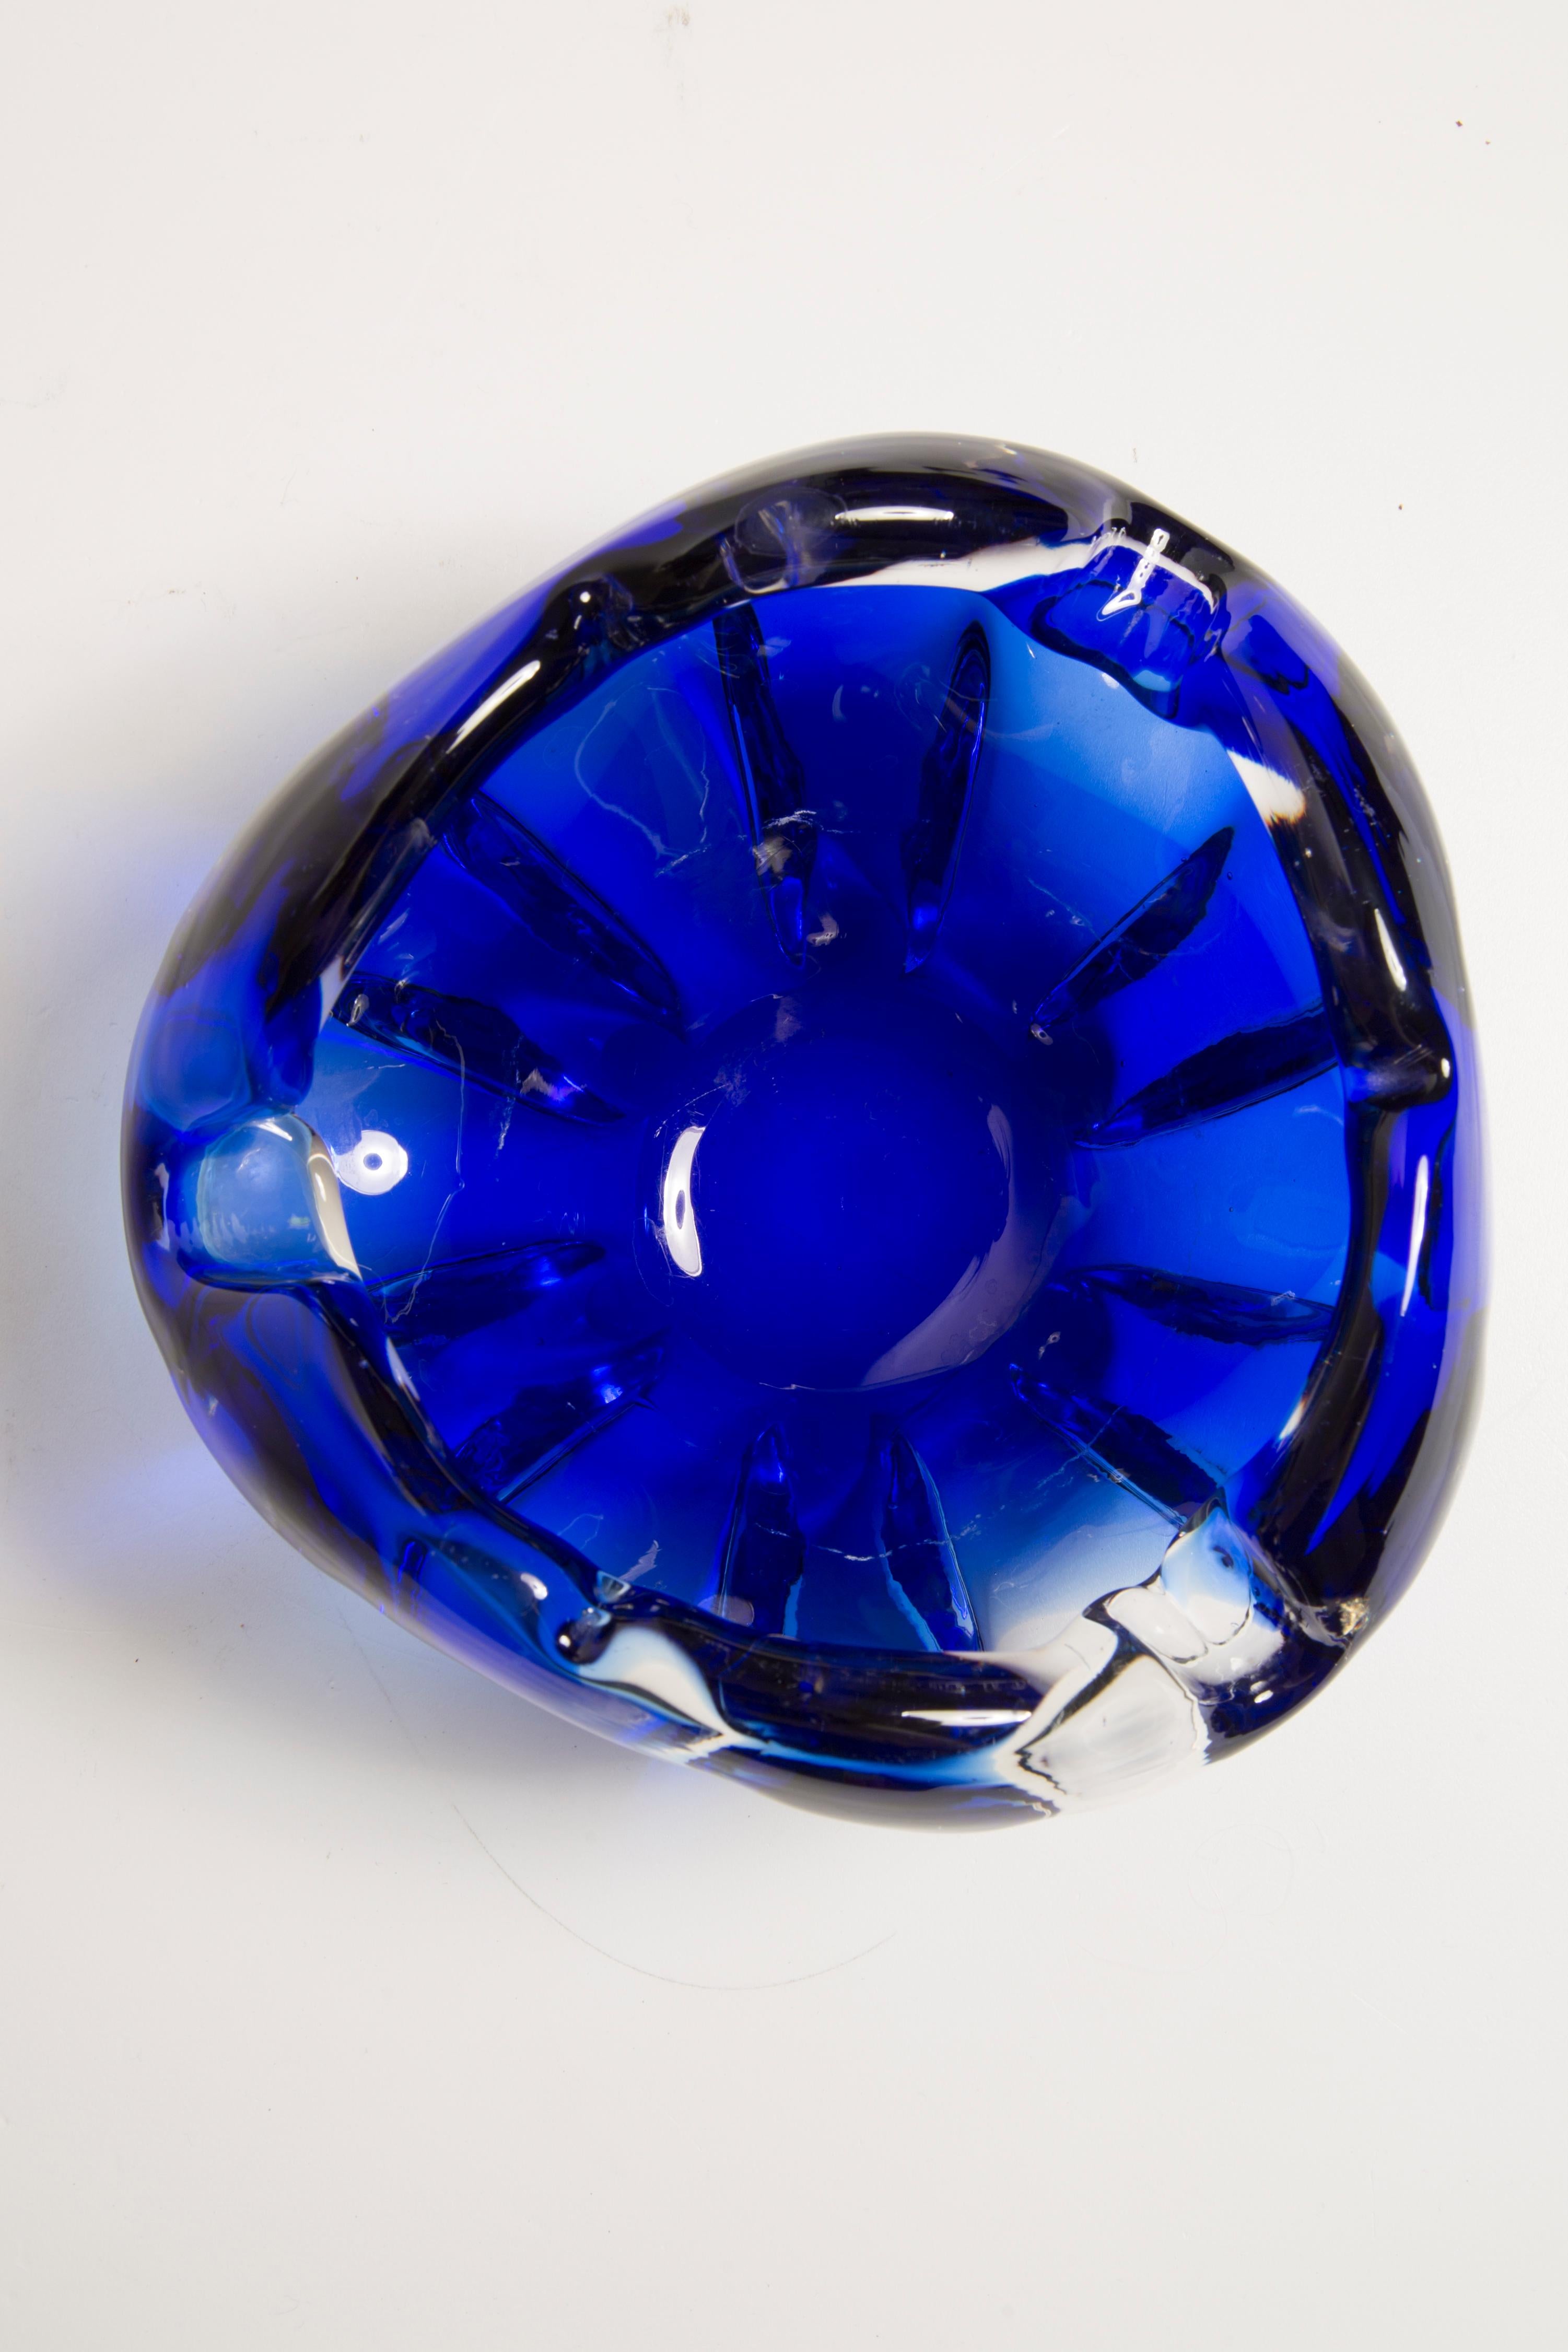 Mid Century Murano Blue Glass Bowl Ashtray Element, Italy, 1970s For Sale 2